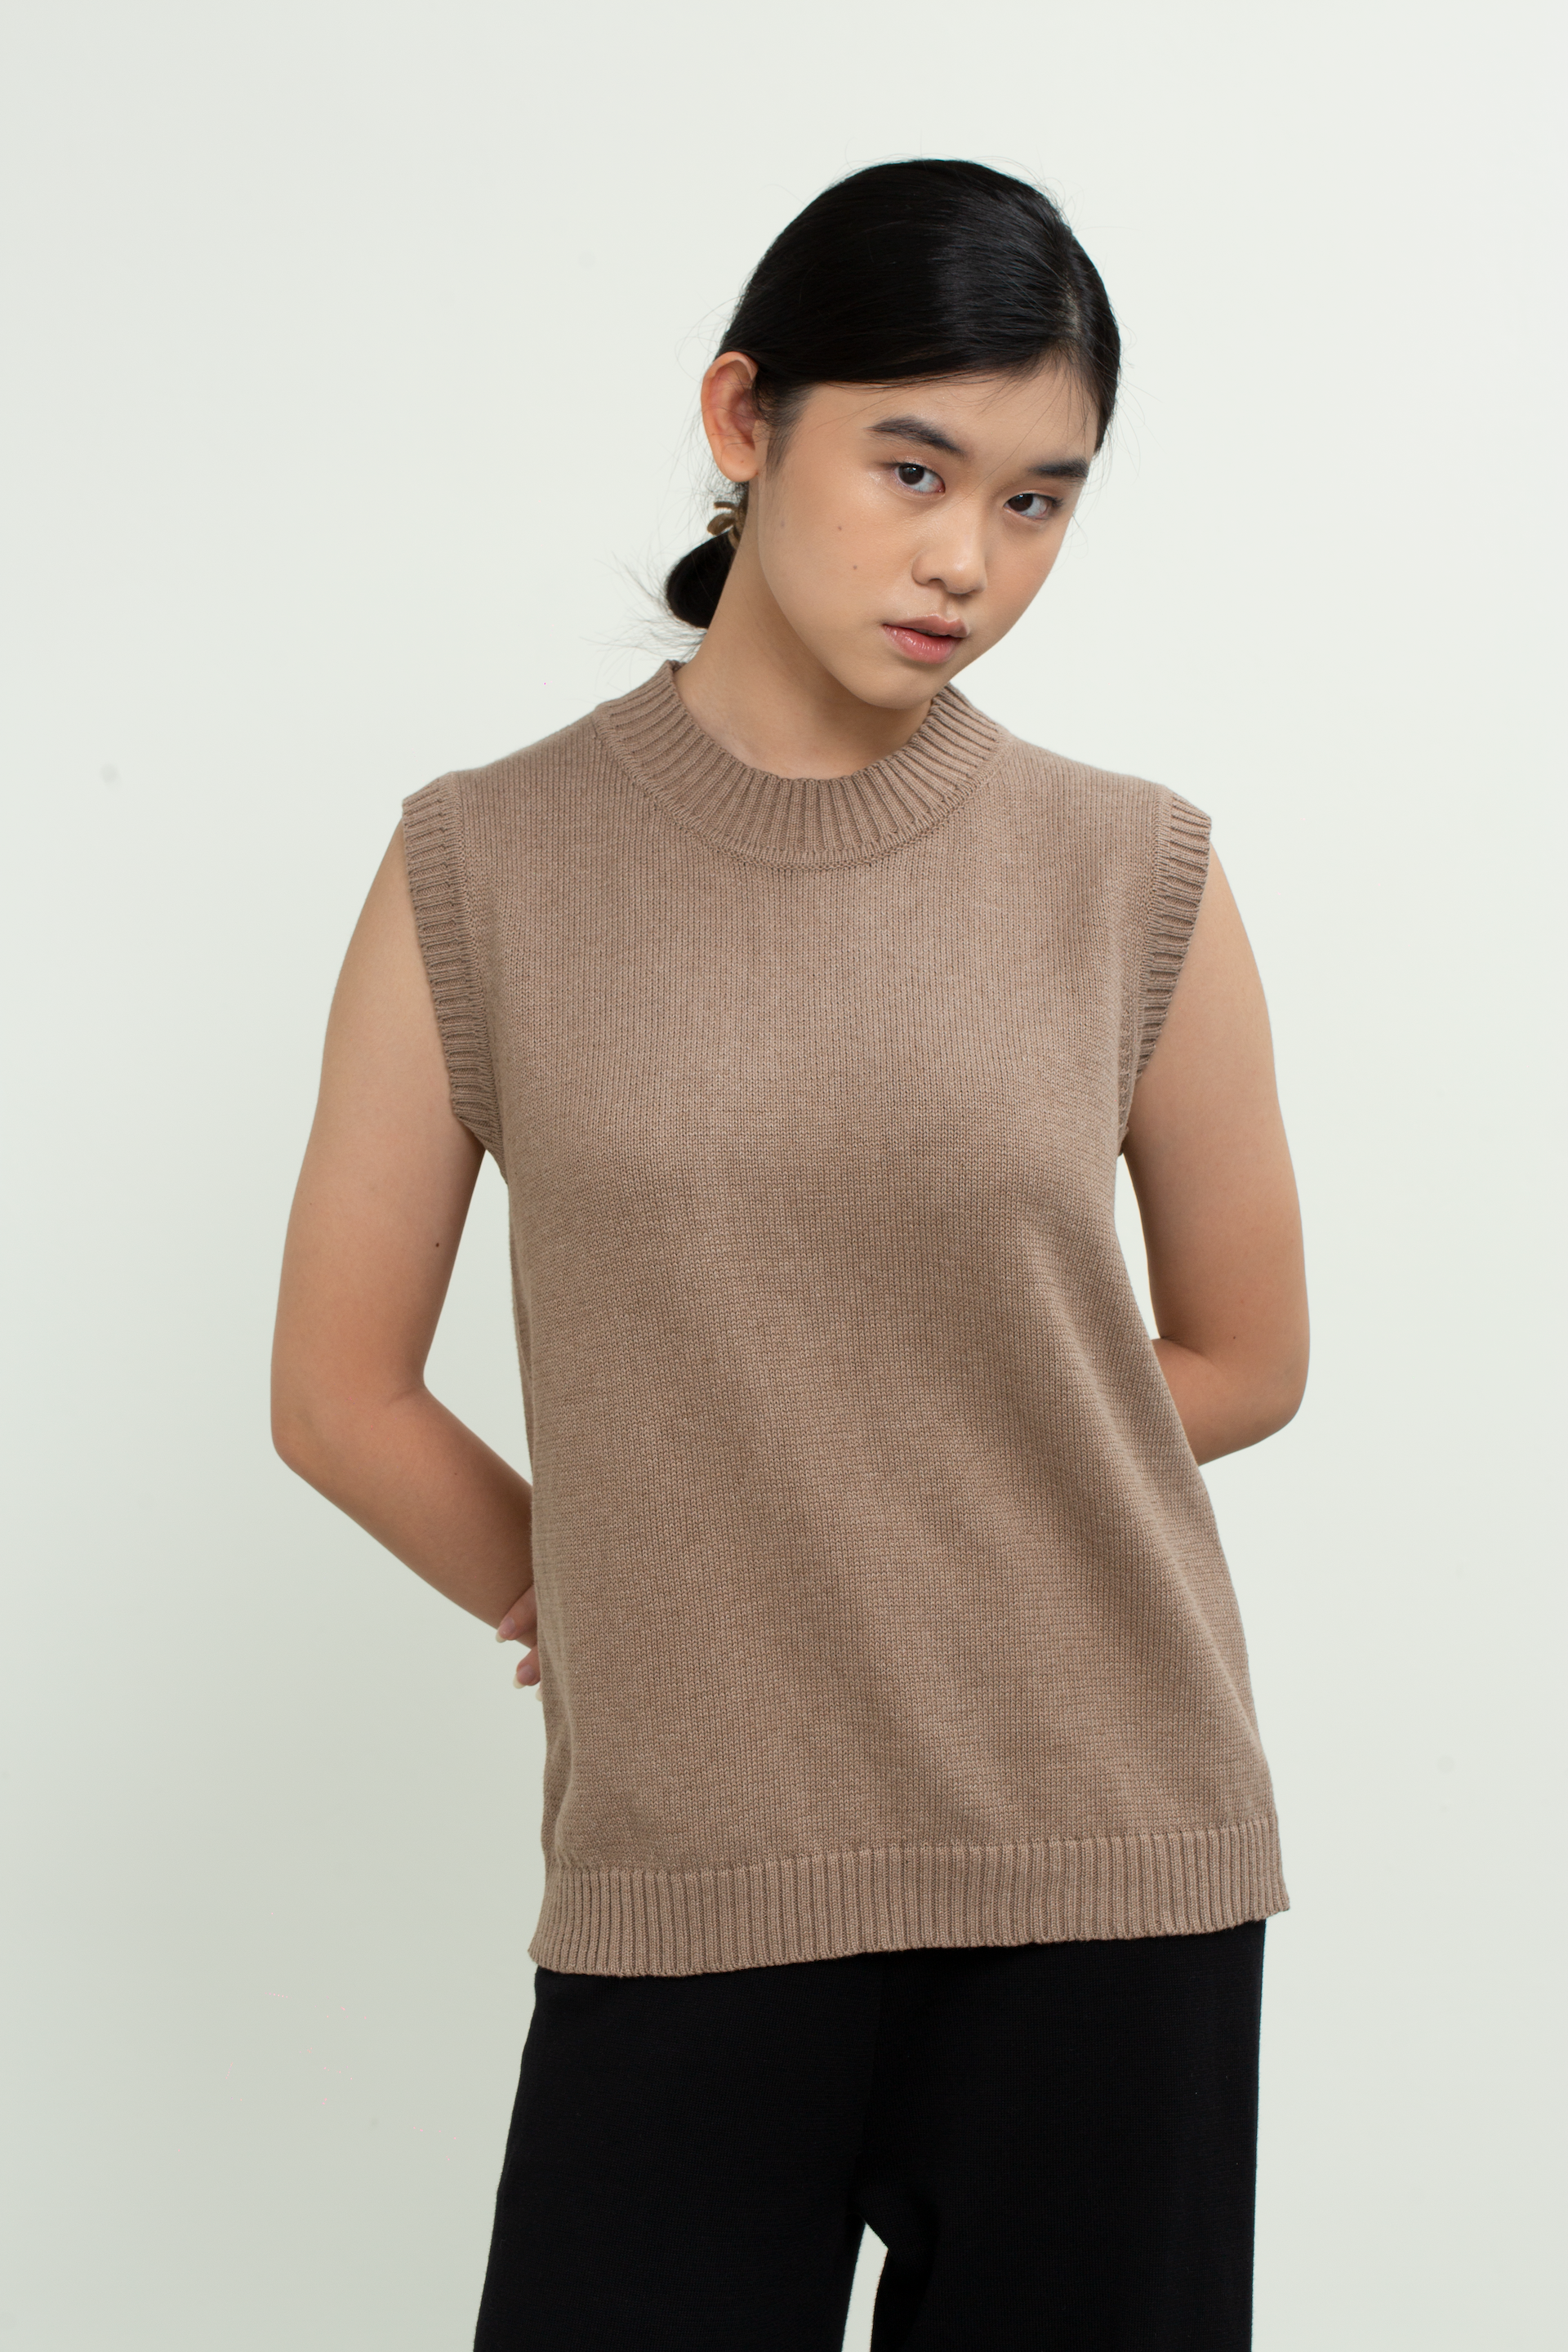 Knit Sleeveless Vest Top in Brown